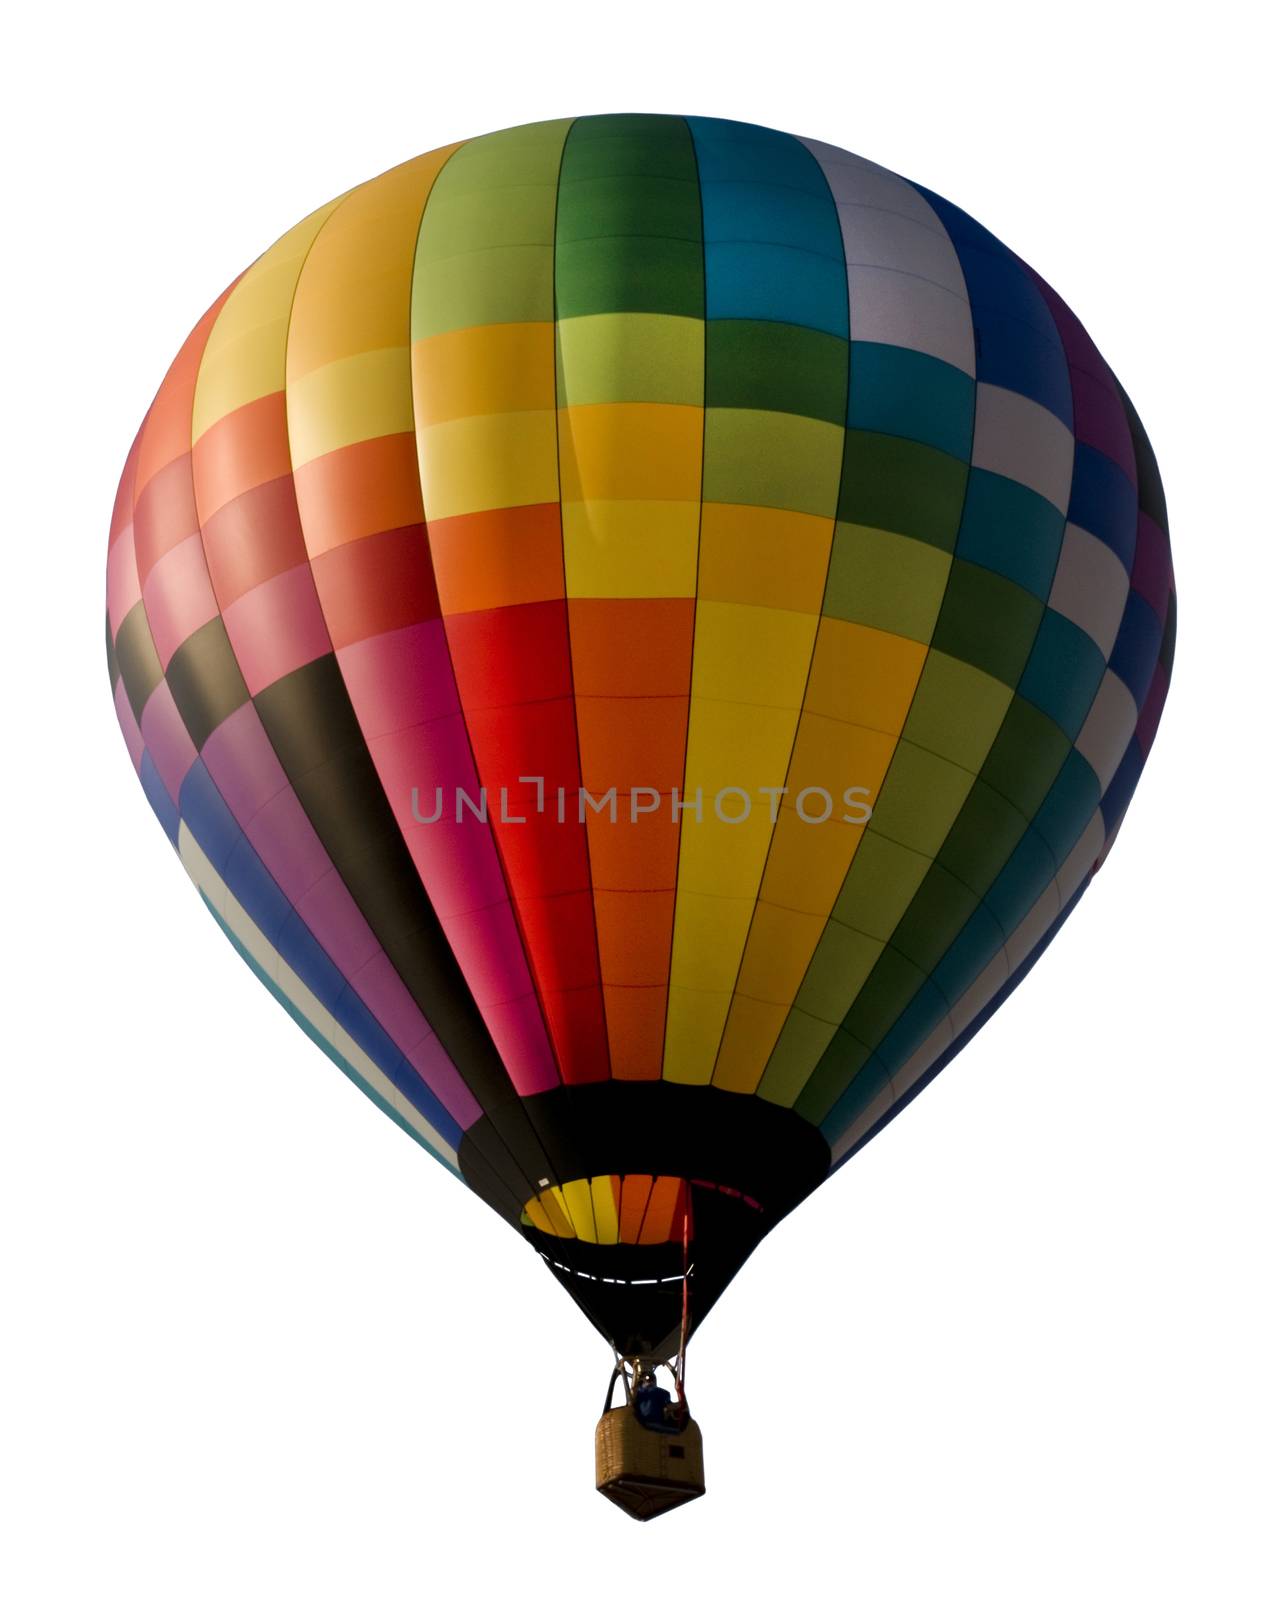 Colorful hot air balloon isolated against white by Balefire9